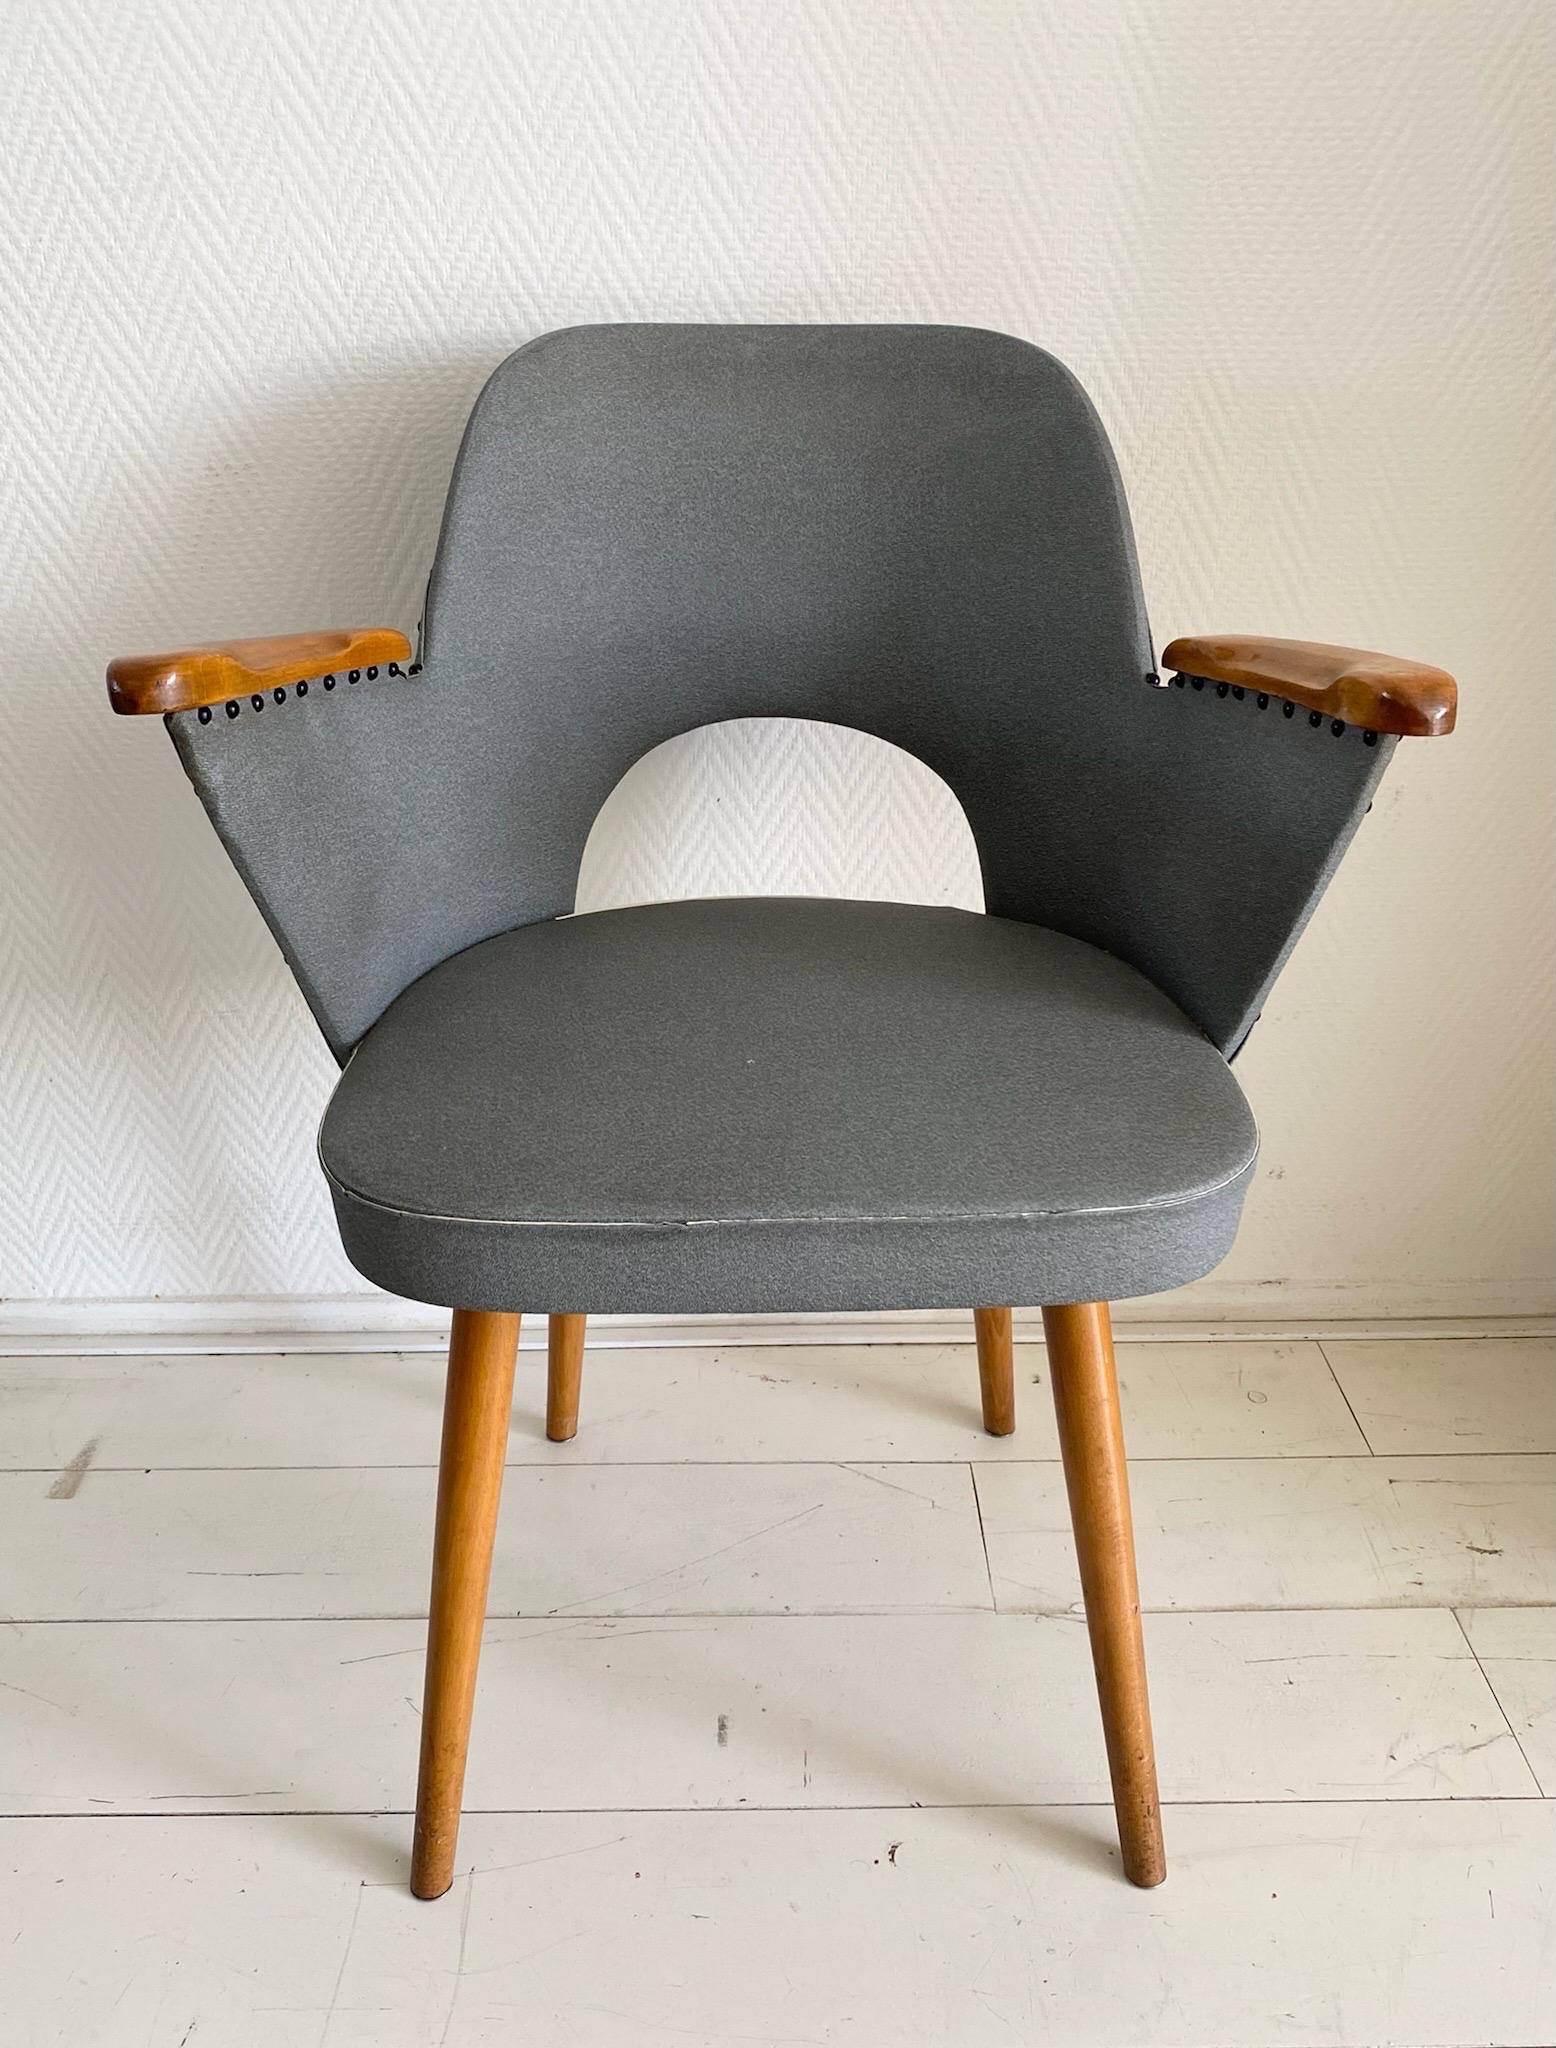 Beautiful Thonet armchair designed by the Viennese architect and designer Oswald Haerdtl. The chair has wooden armrests and legs and is upholstered in blue/grey leatherette.
Marked twice on the bottom.

The chair remains in a good vintage condition